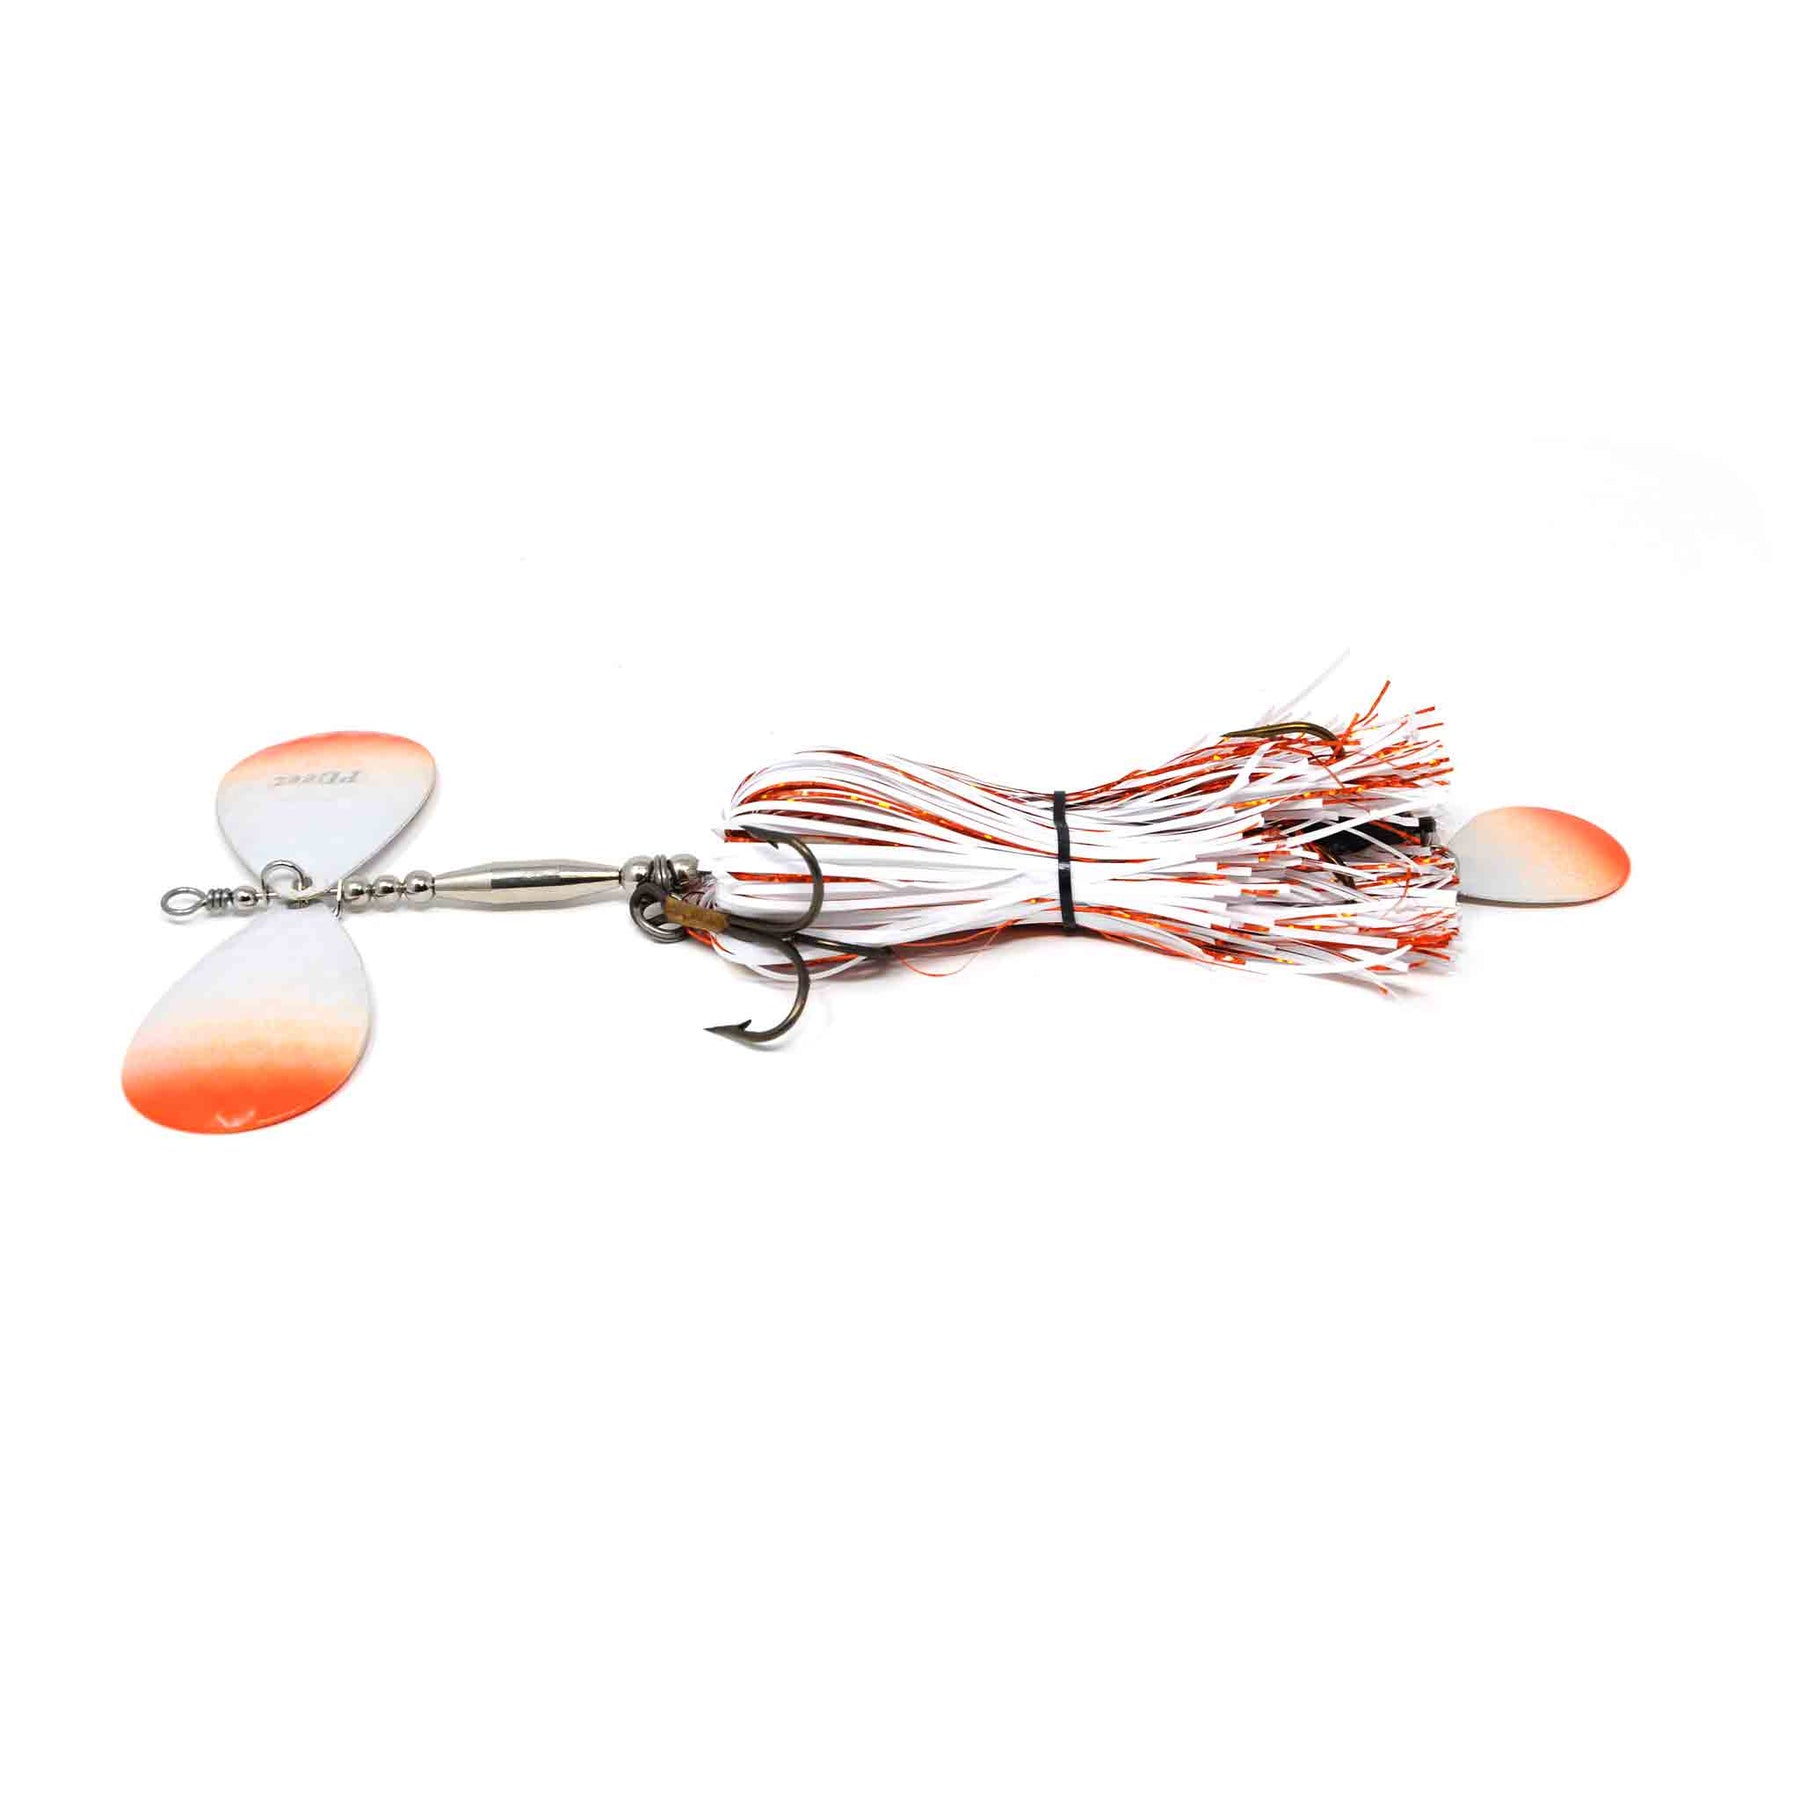 Pdeez LSG Missile Tail Spin (9/9) Creamsicle Bucktails